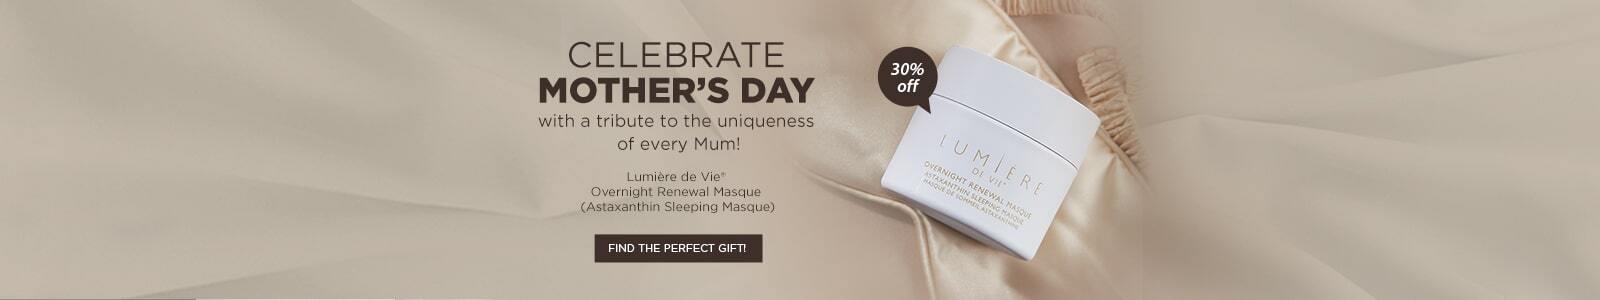 Celebrate Mother's Day with a tribute to the uniqueness of every Mum! Lumiere De Vie Overnight Renewal Masque (Astaxanthin Sleeping Masque) 30% off Find the perfect gift